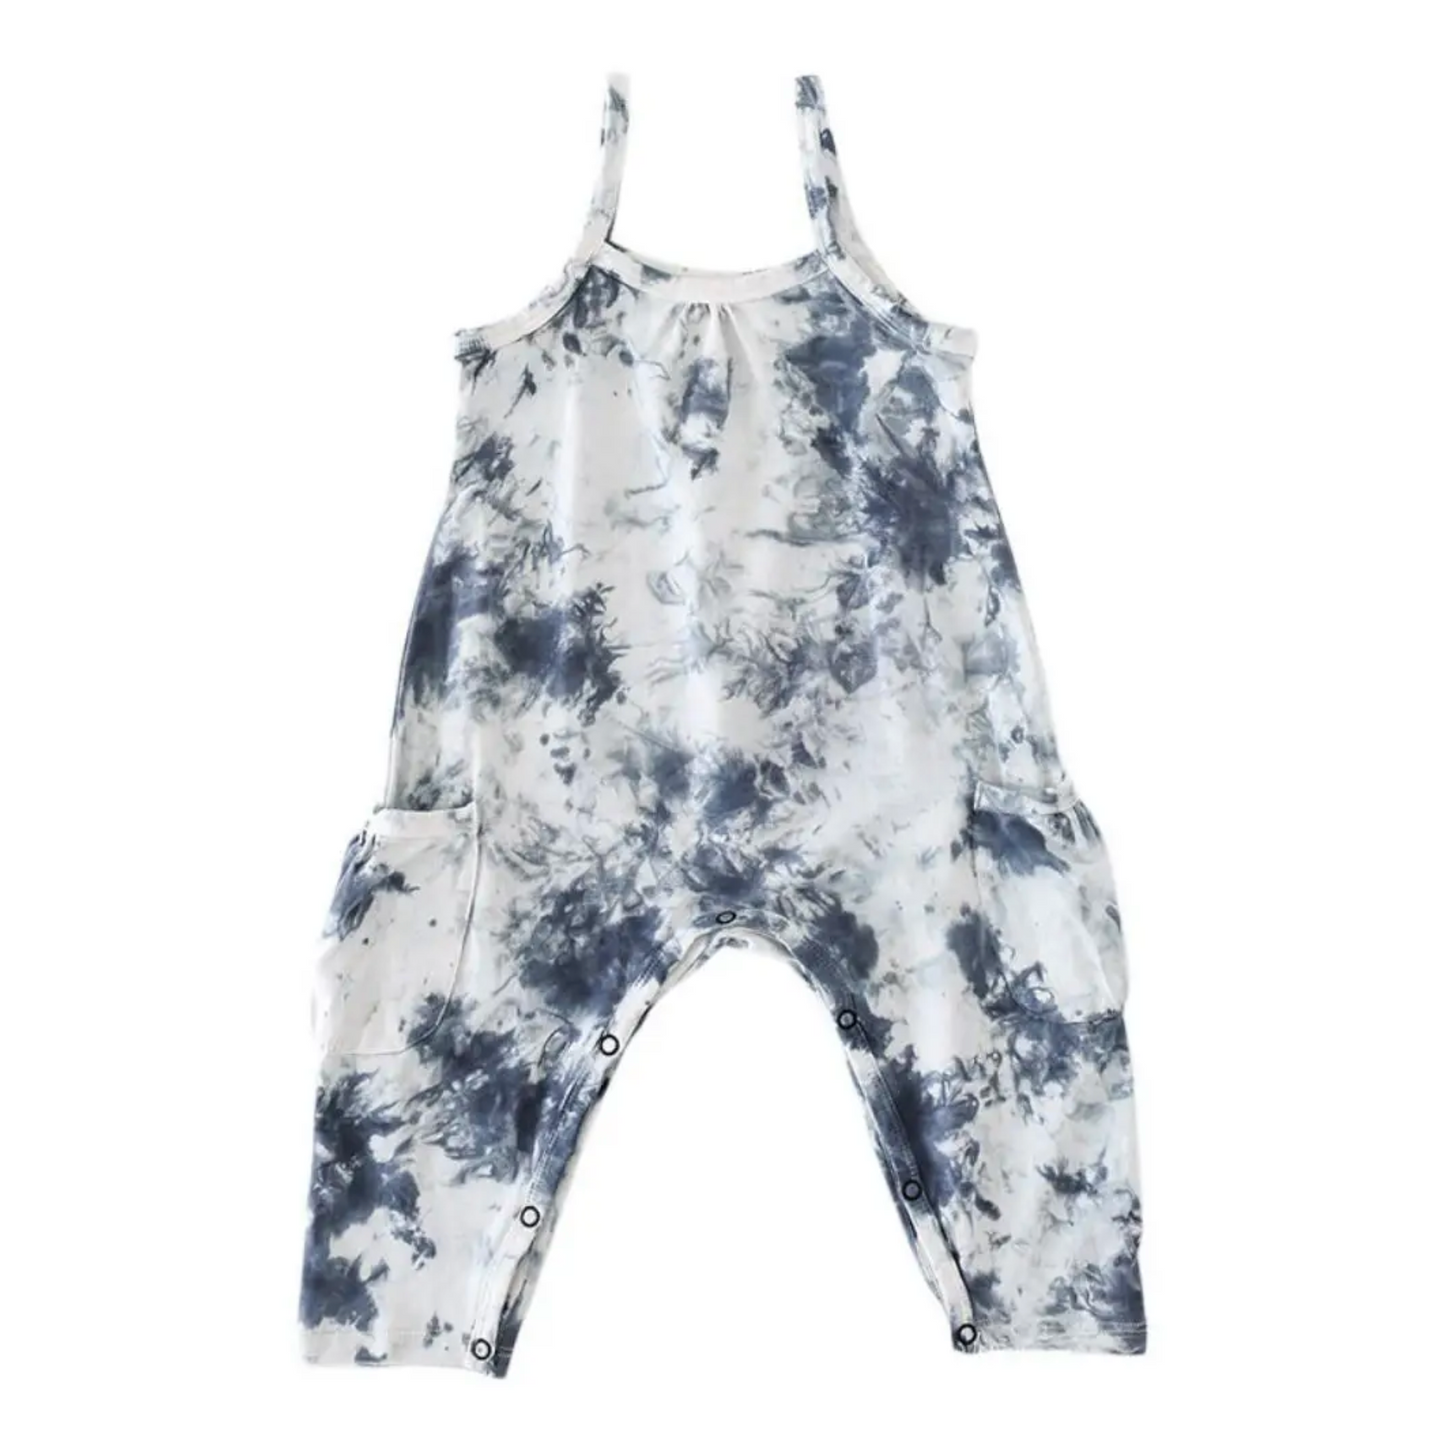 Lola & Taylor - Gathered Front Tank Romper - Marble Tie Dye